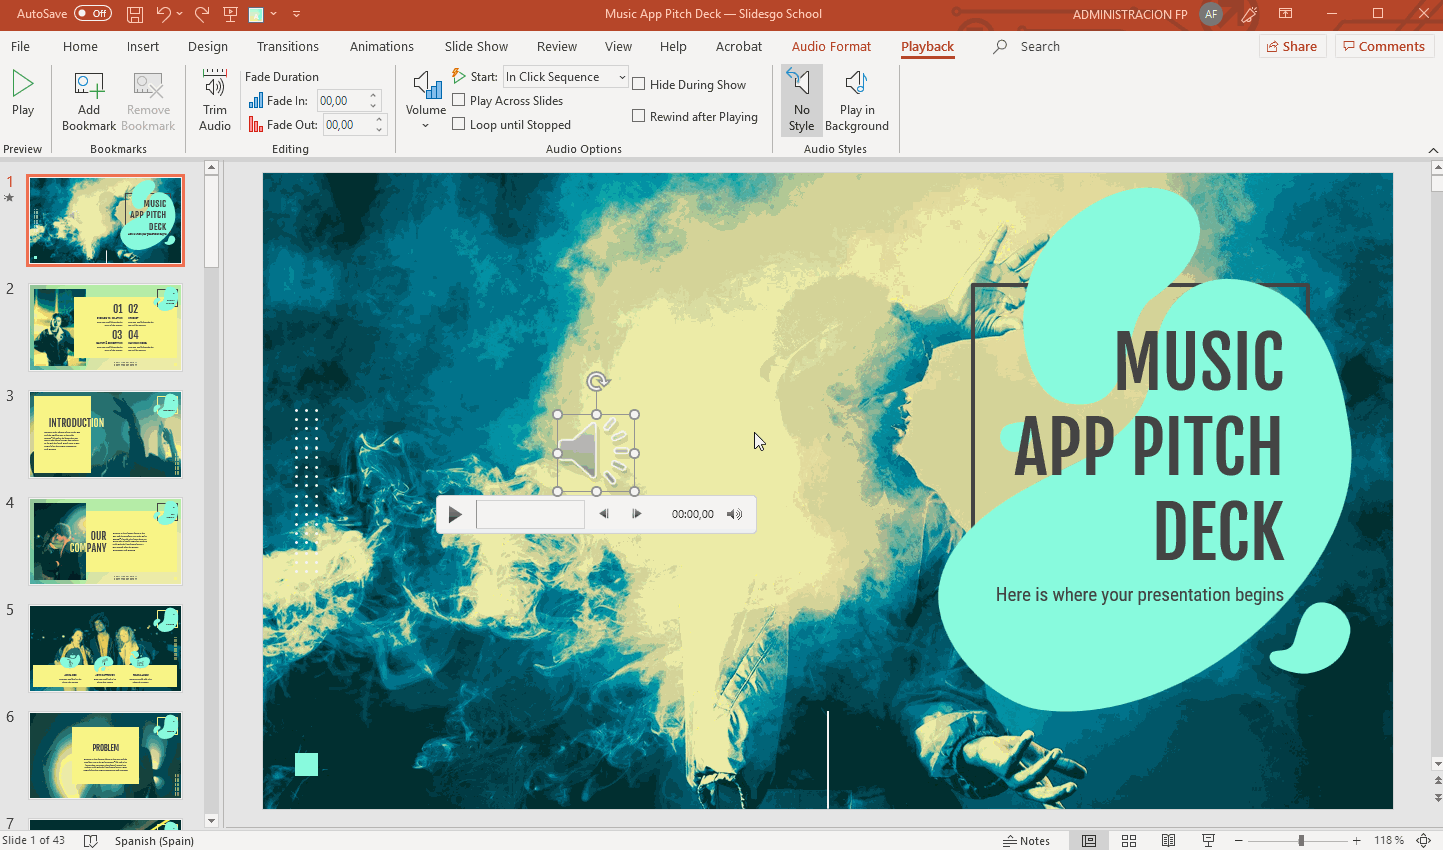 How to Add, Record or Edit Audio or Music in PowerPoint -12